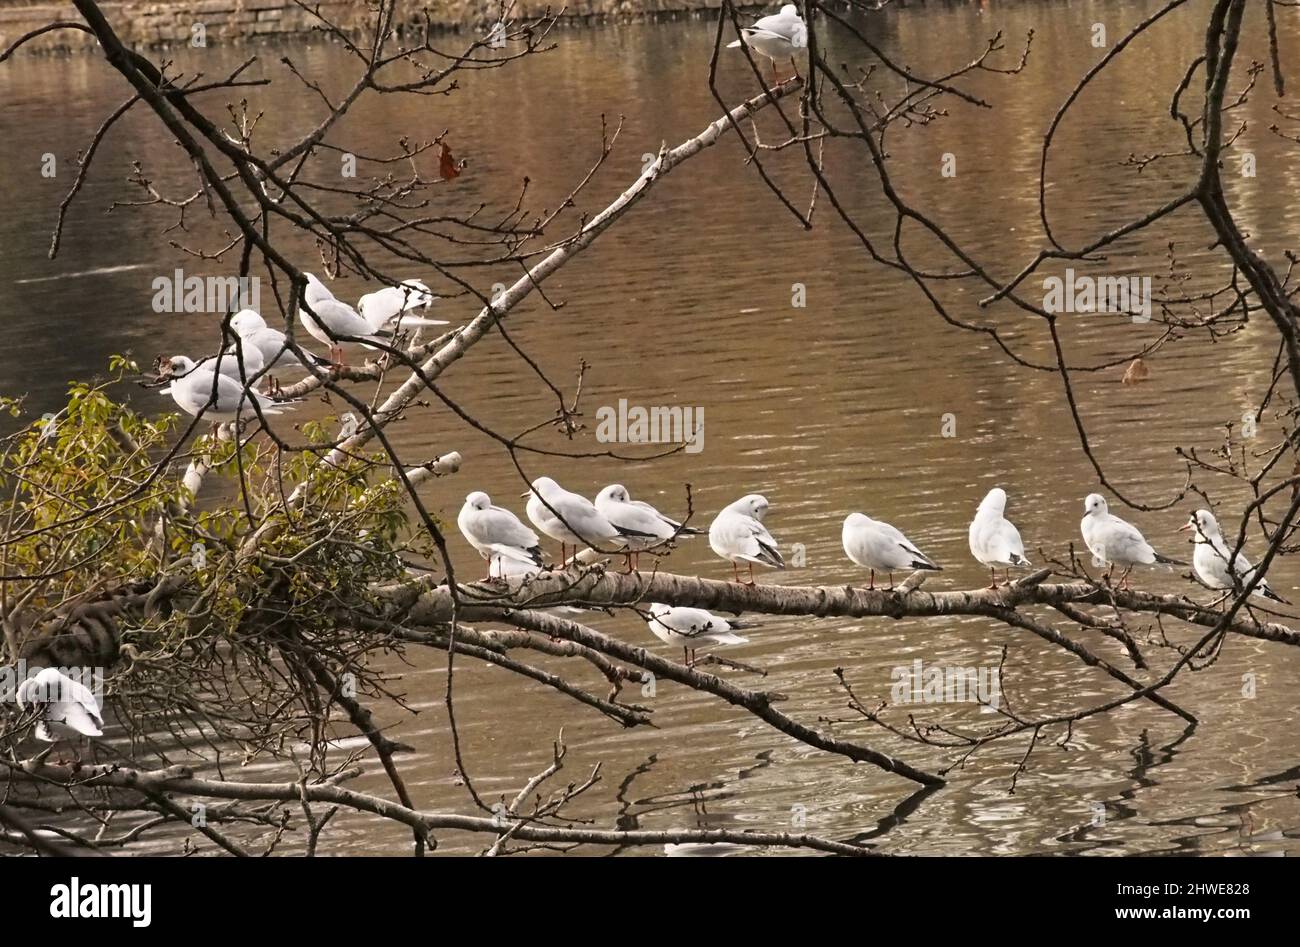 A view of a group of black headed gulls sitting and preening on a fallen tree branch above a freshwater lake Stock Photo